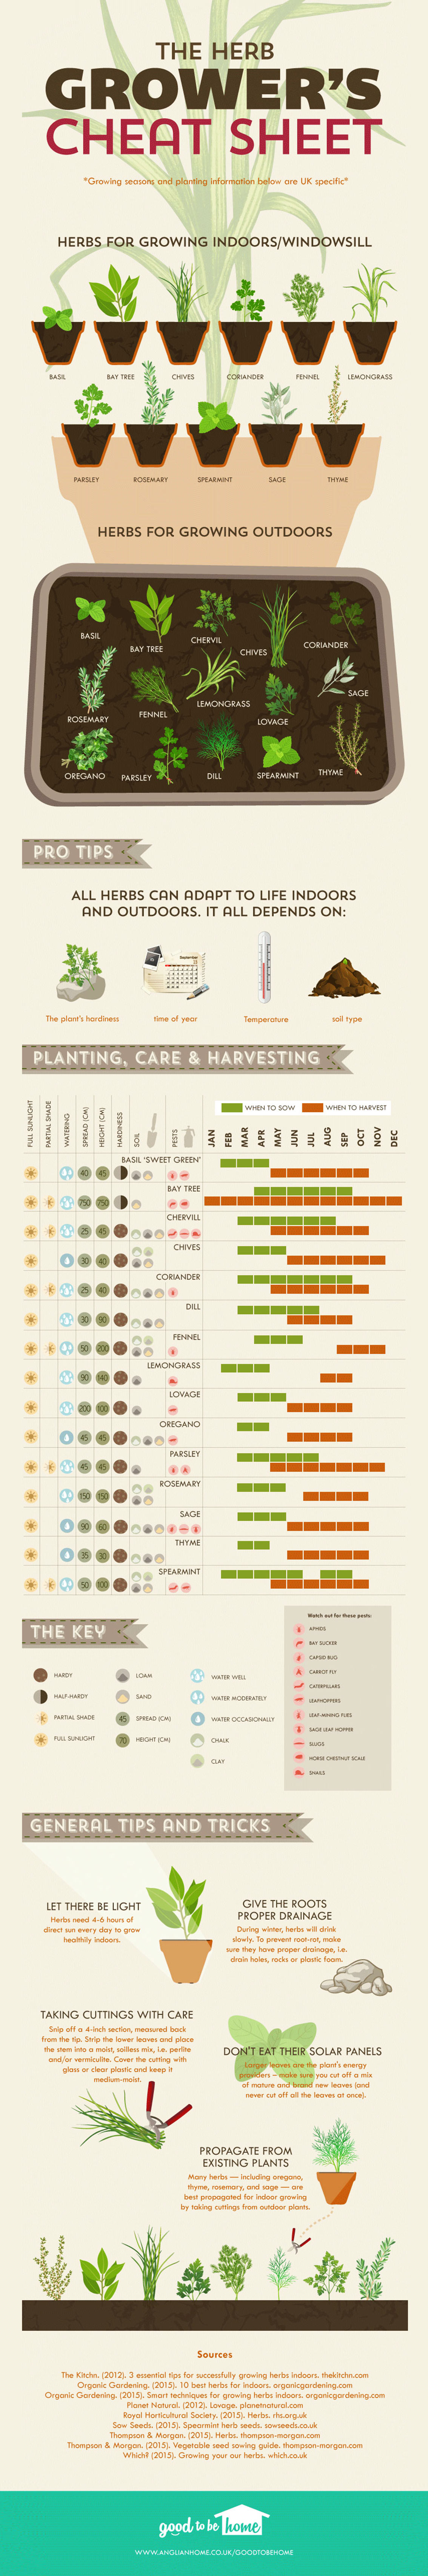 The Herb Growers Cheetsheet Infographic